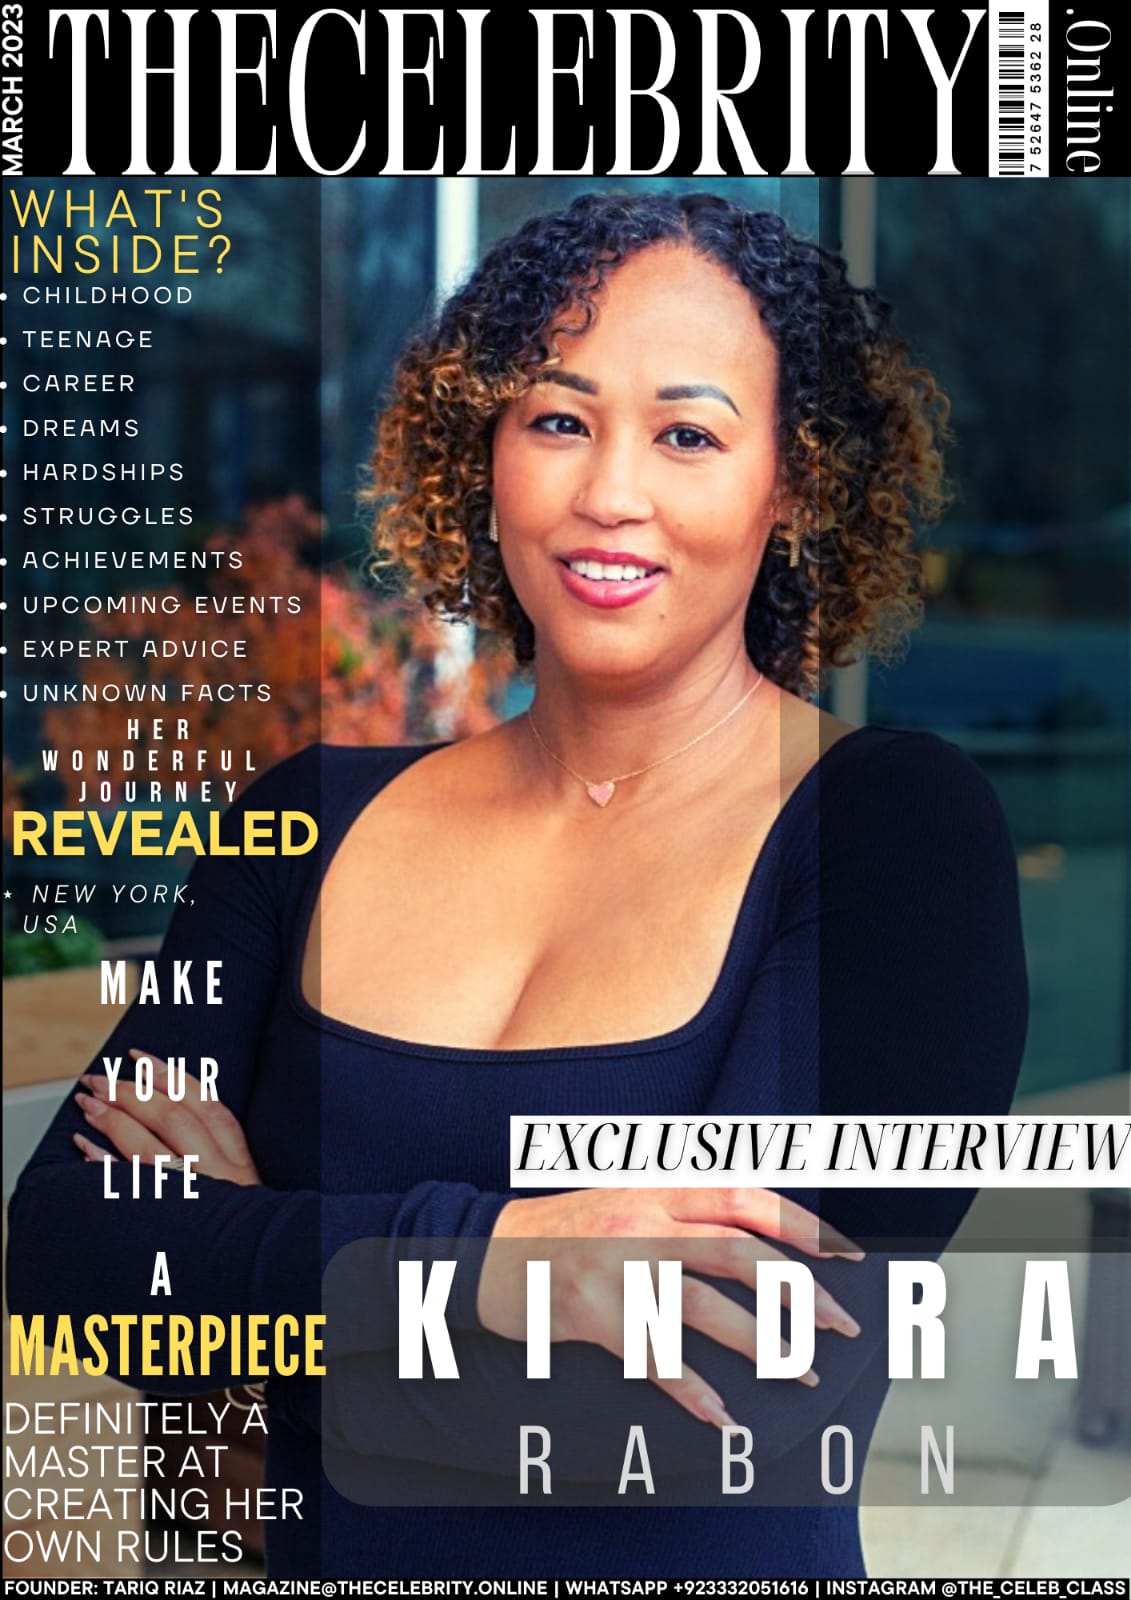 Kindra Rabon Exclusive Interview – ‘Never sell yourself short, reach higher than you currently are’